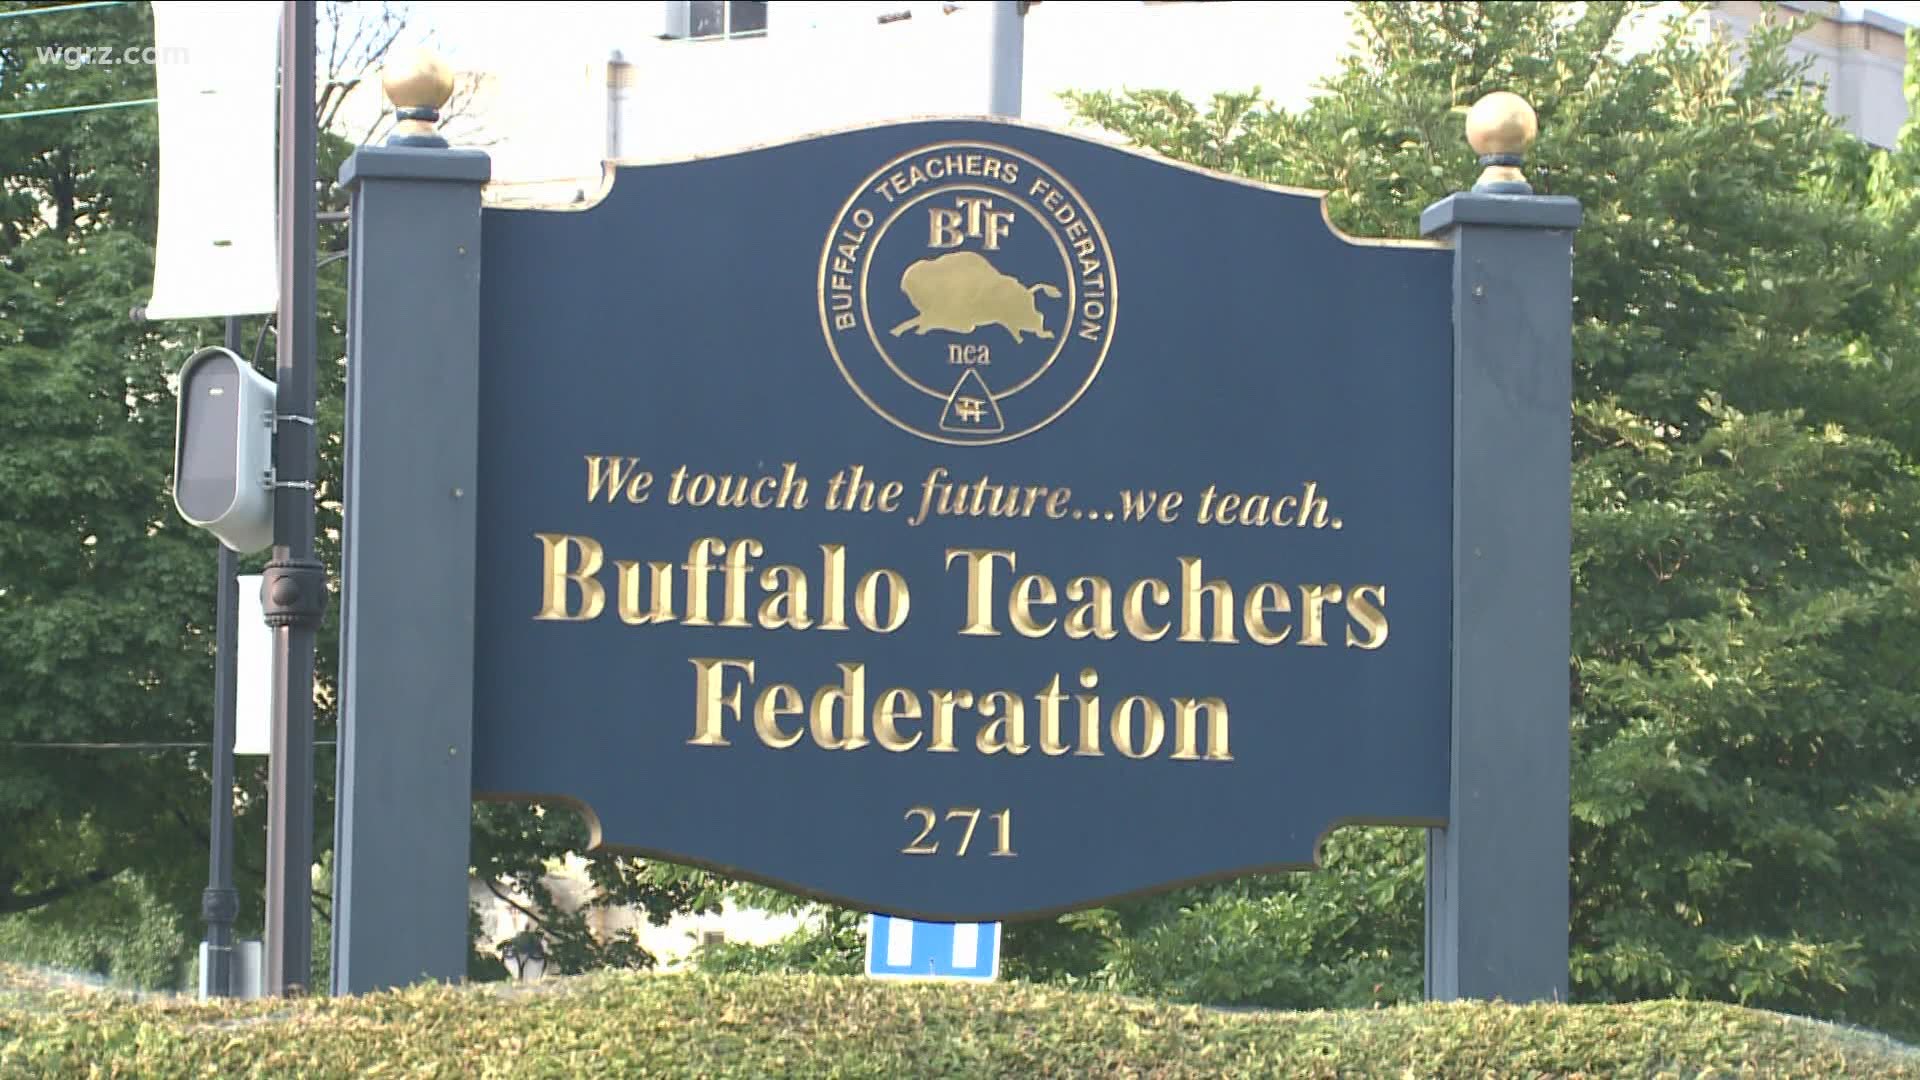 All though the first day of class for Buffalo Public Schools is next Tuesday, the teachers union still says the district's plan is unsafe.